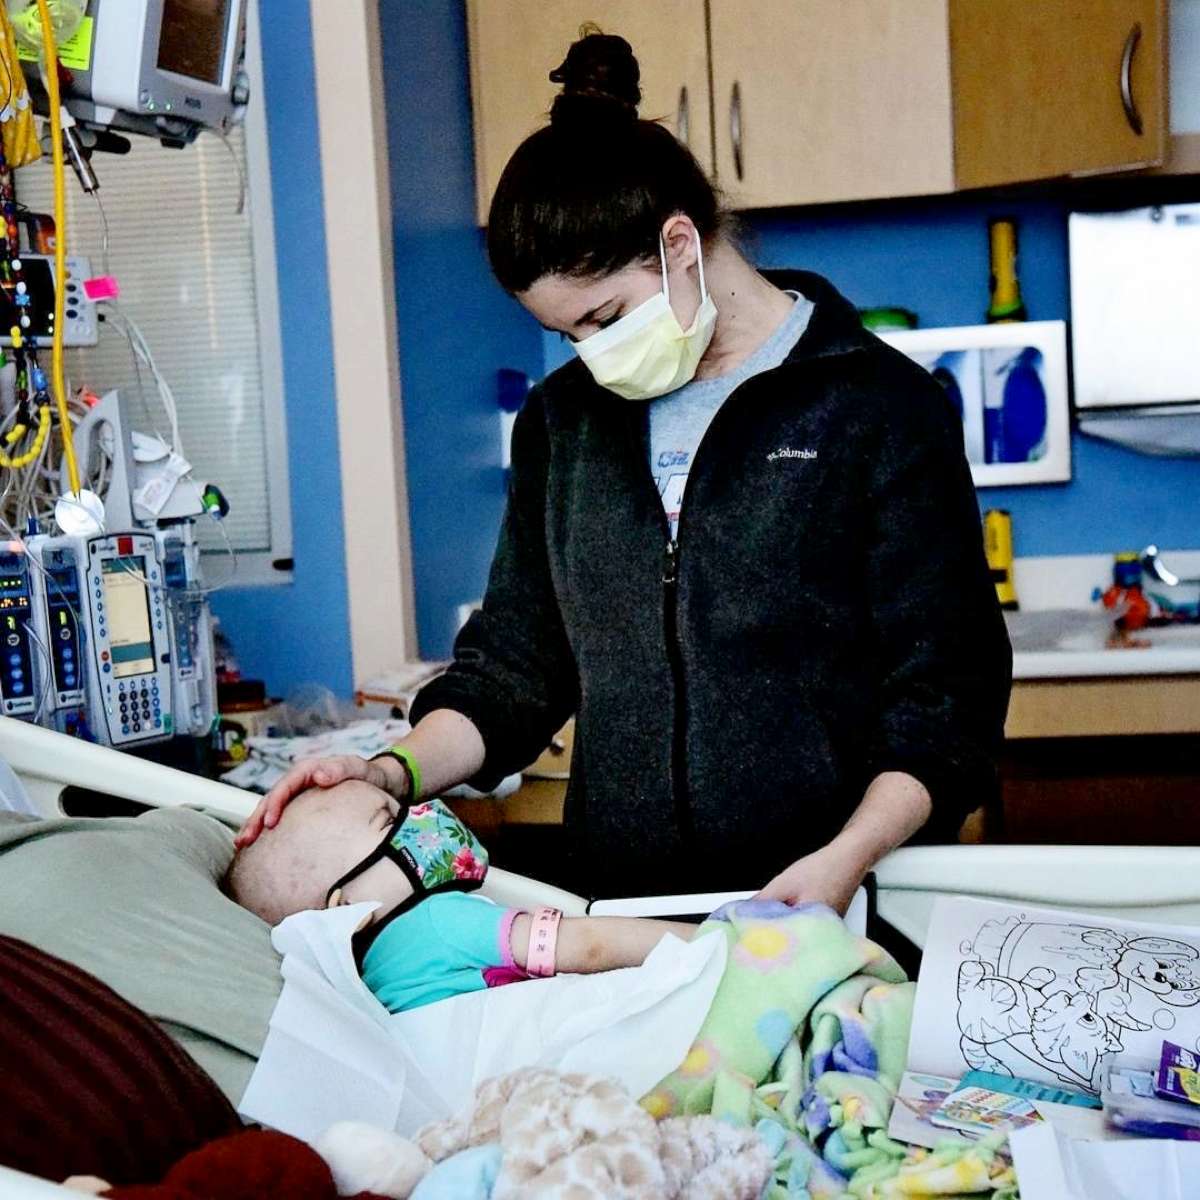 PHOTO: Shelby Skiles comforts her 2-year-old daughter Sophie as she undergoes treatment for T-cell lymphoma.